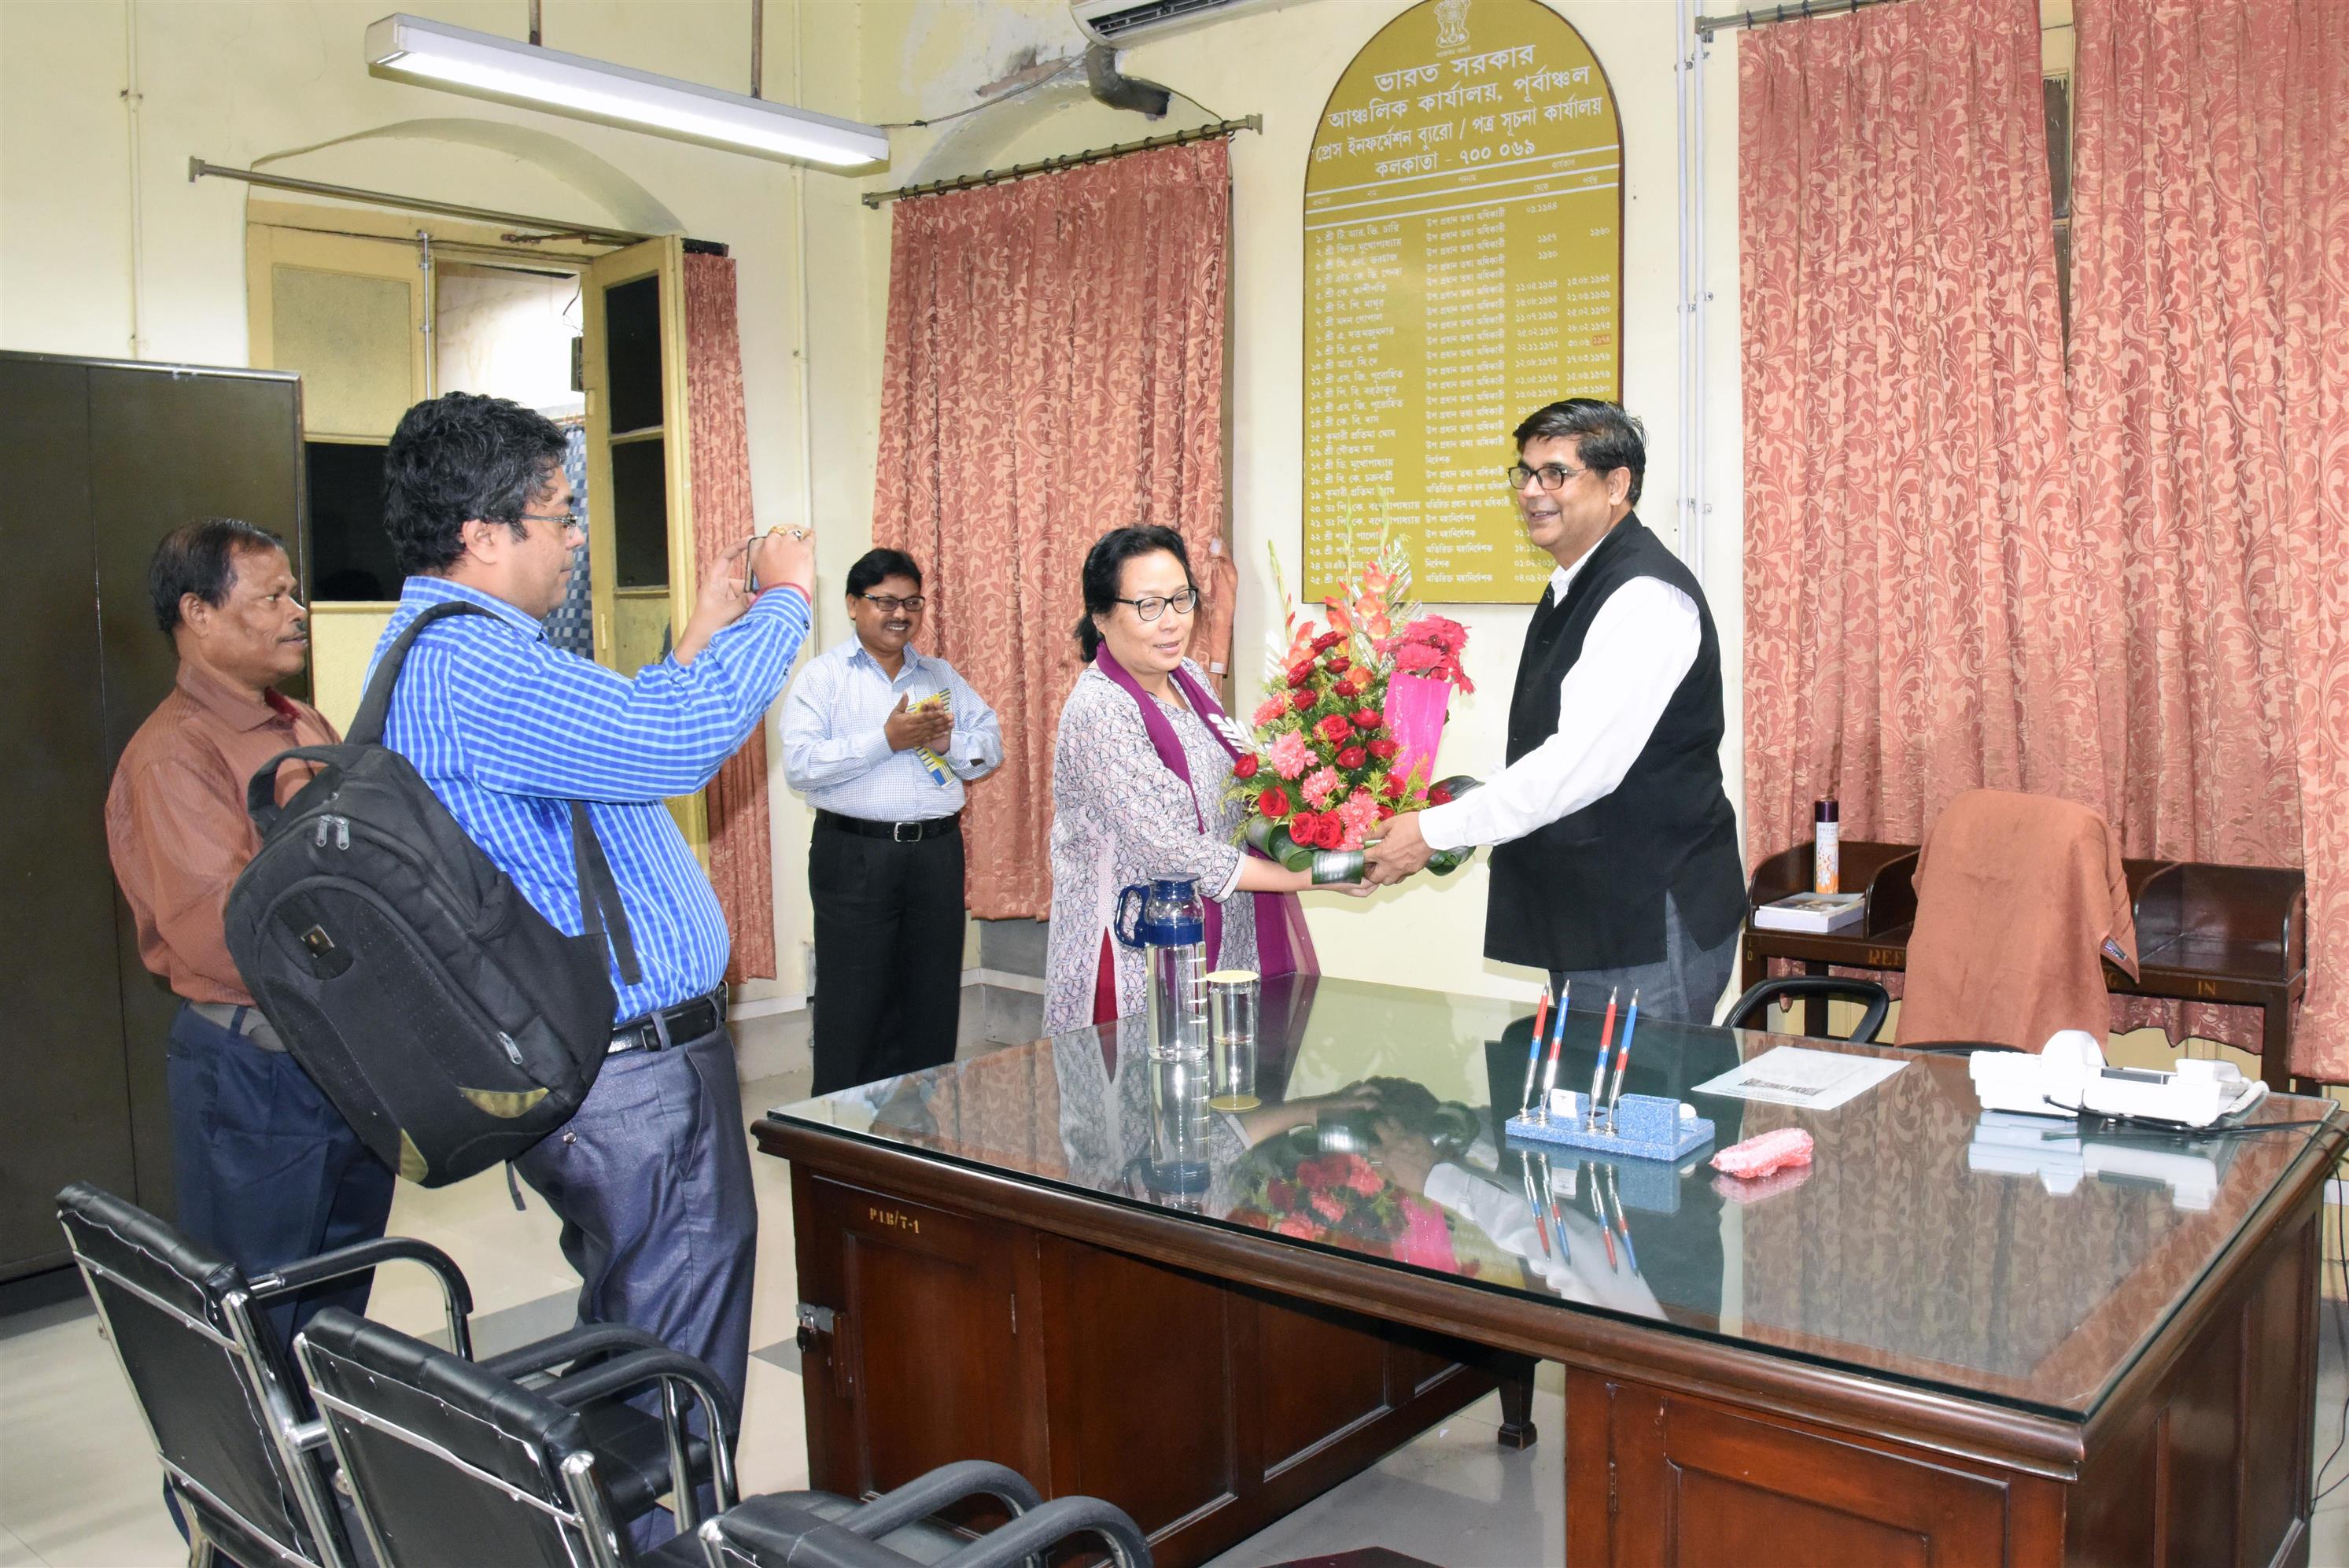  Shri Rabindranath Mishra, Director General  (Eastern Zone), Ministry of Information & Broadcasting assuming the charge in Kolkata on November 25, 2019. He is being received in office by Additional Director General (Eastern Region), Ministry of Information & Broadcasting Miss Jane Namchu.